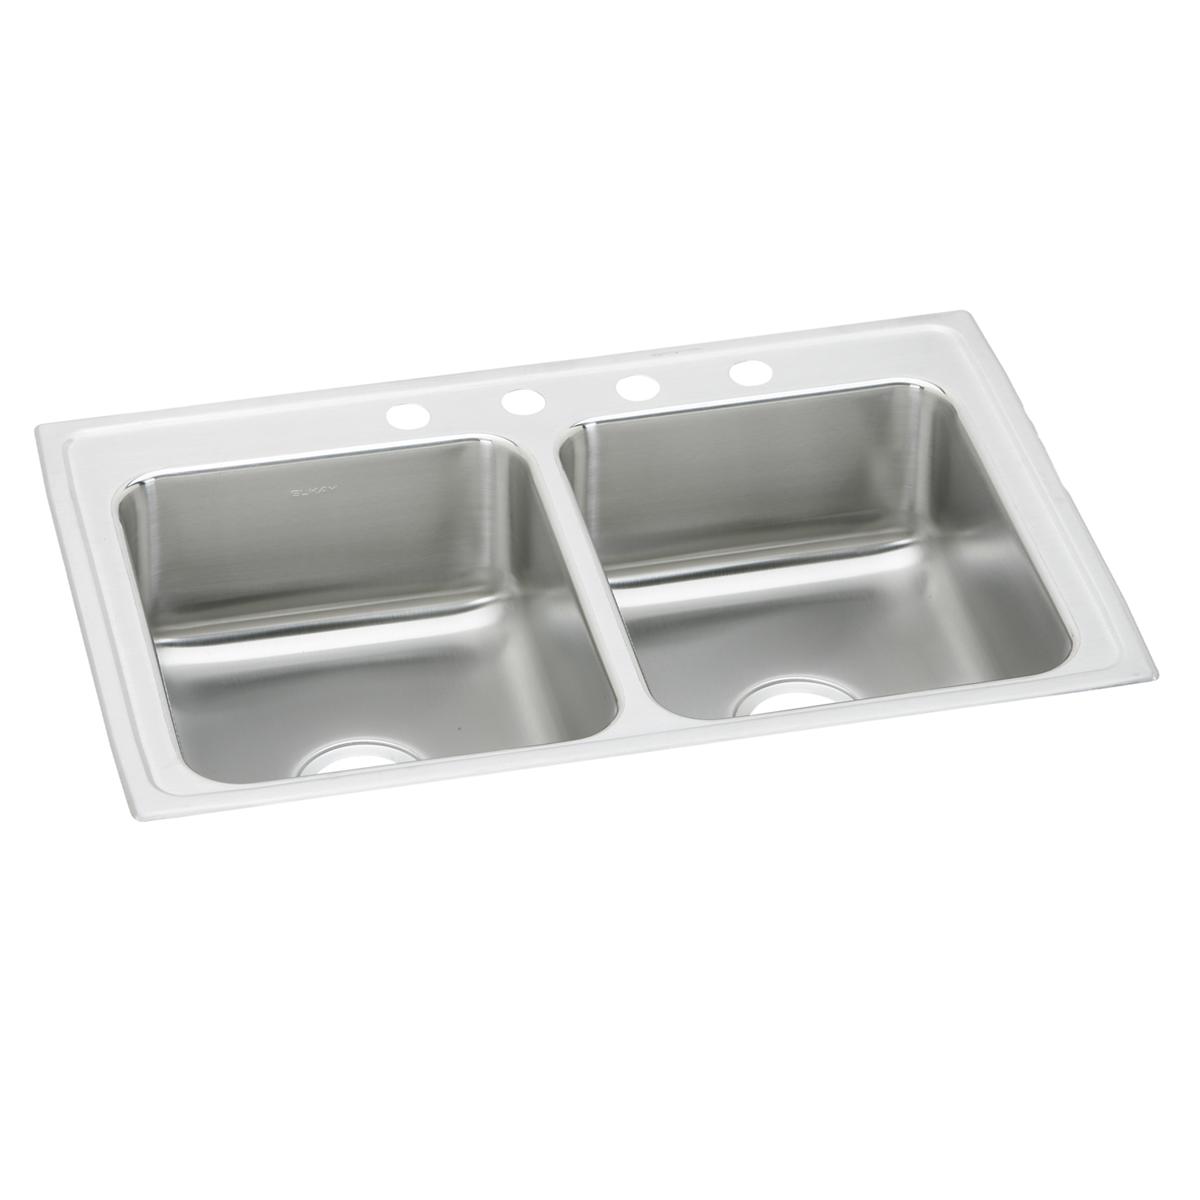 Elkay Lustertone Classic 37" x 22" x 7-5/8" MR2-Hole Equal Double Bowl Drop-in Sink